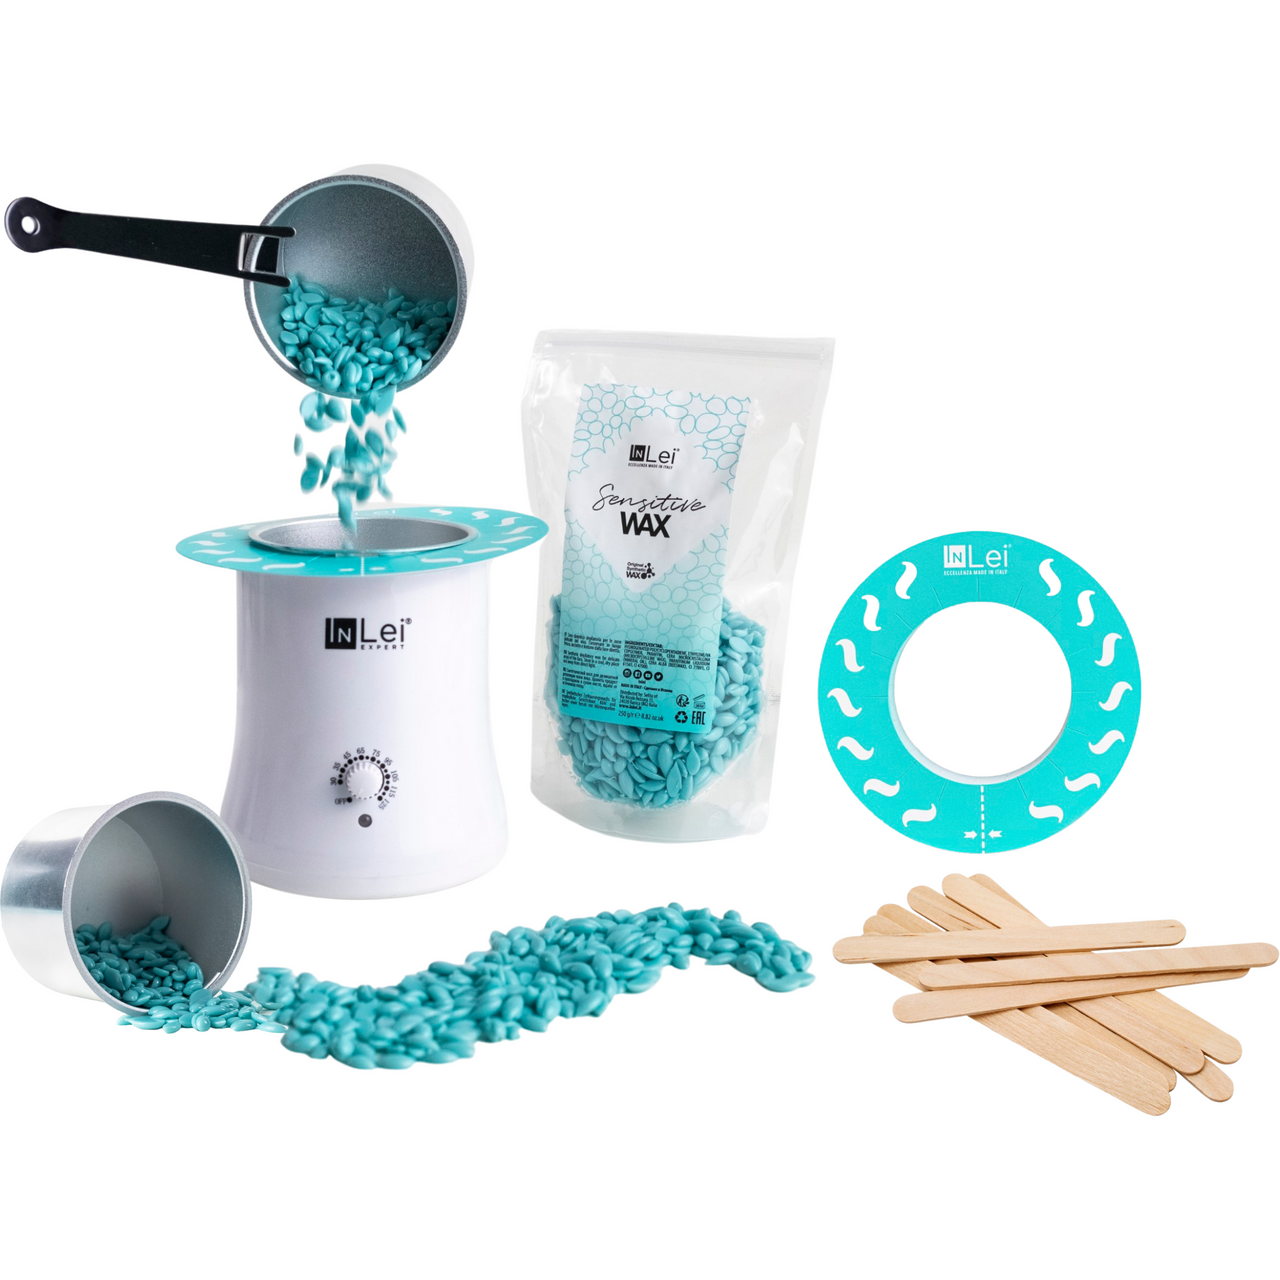 InLei | Face Wax Course | With Professional Wax Kit